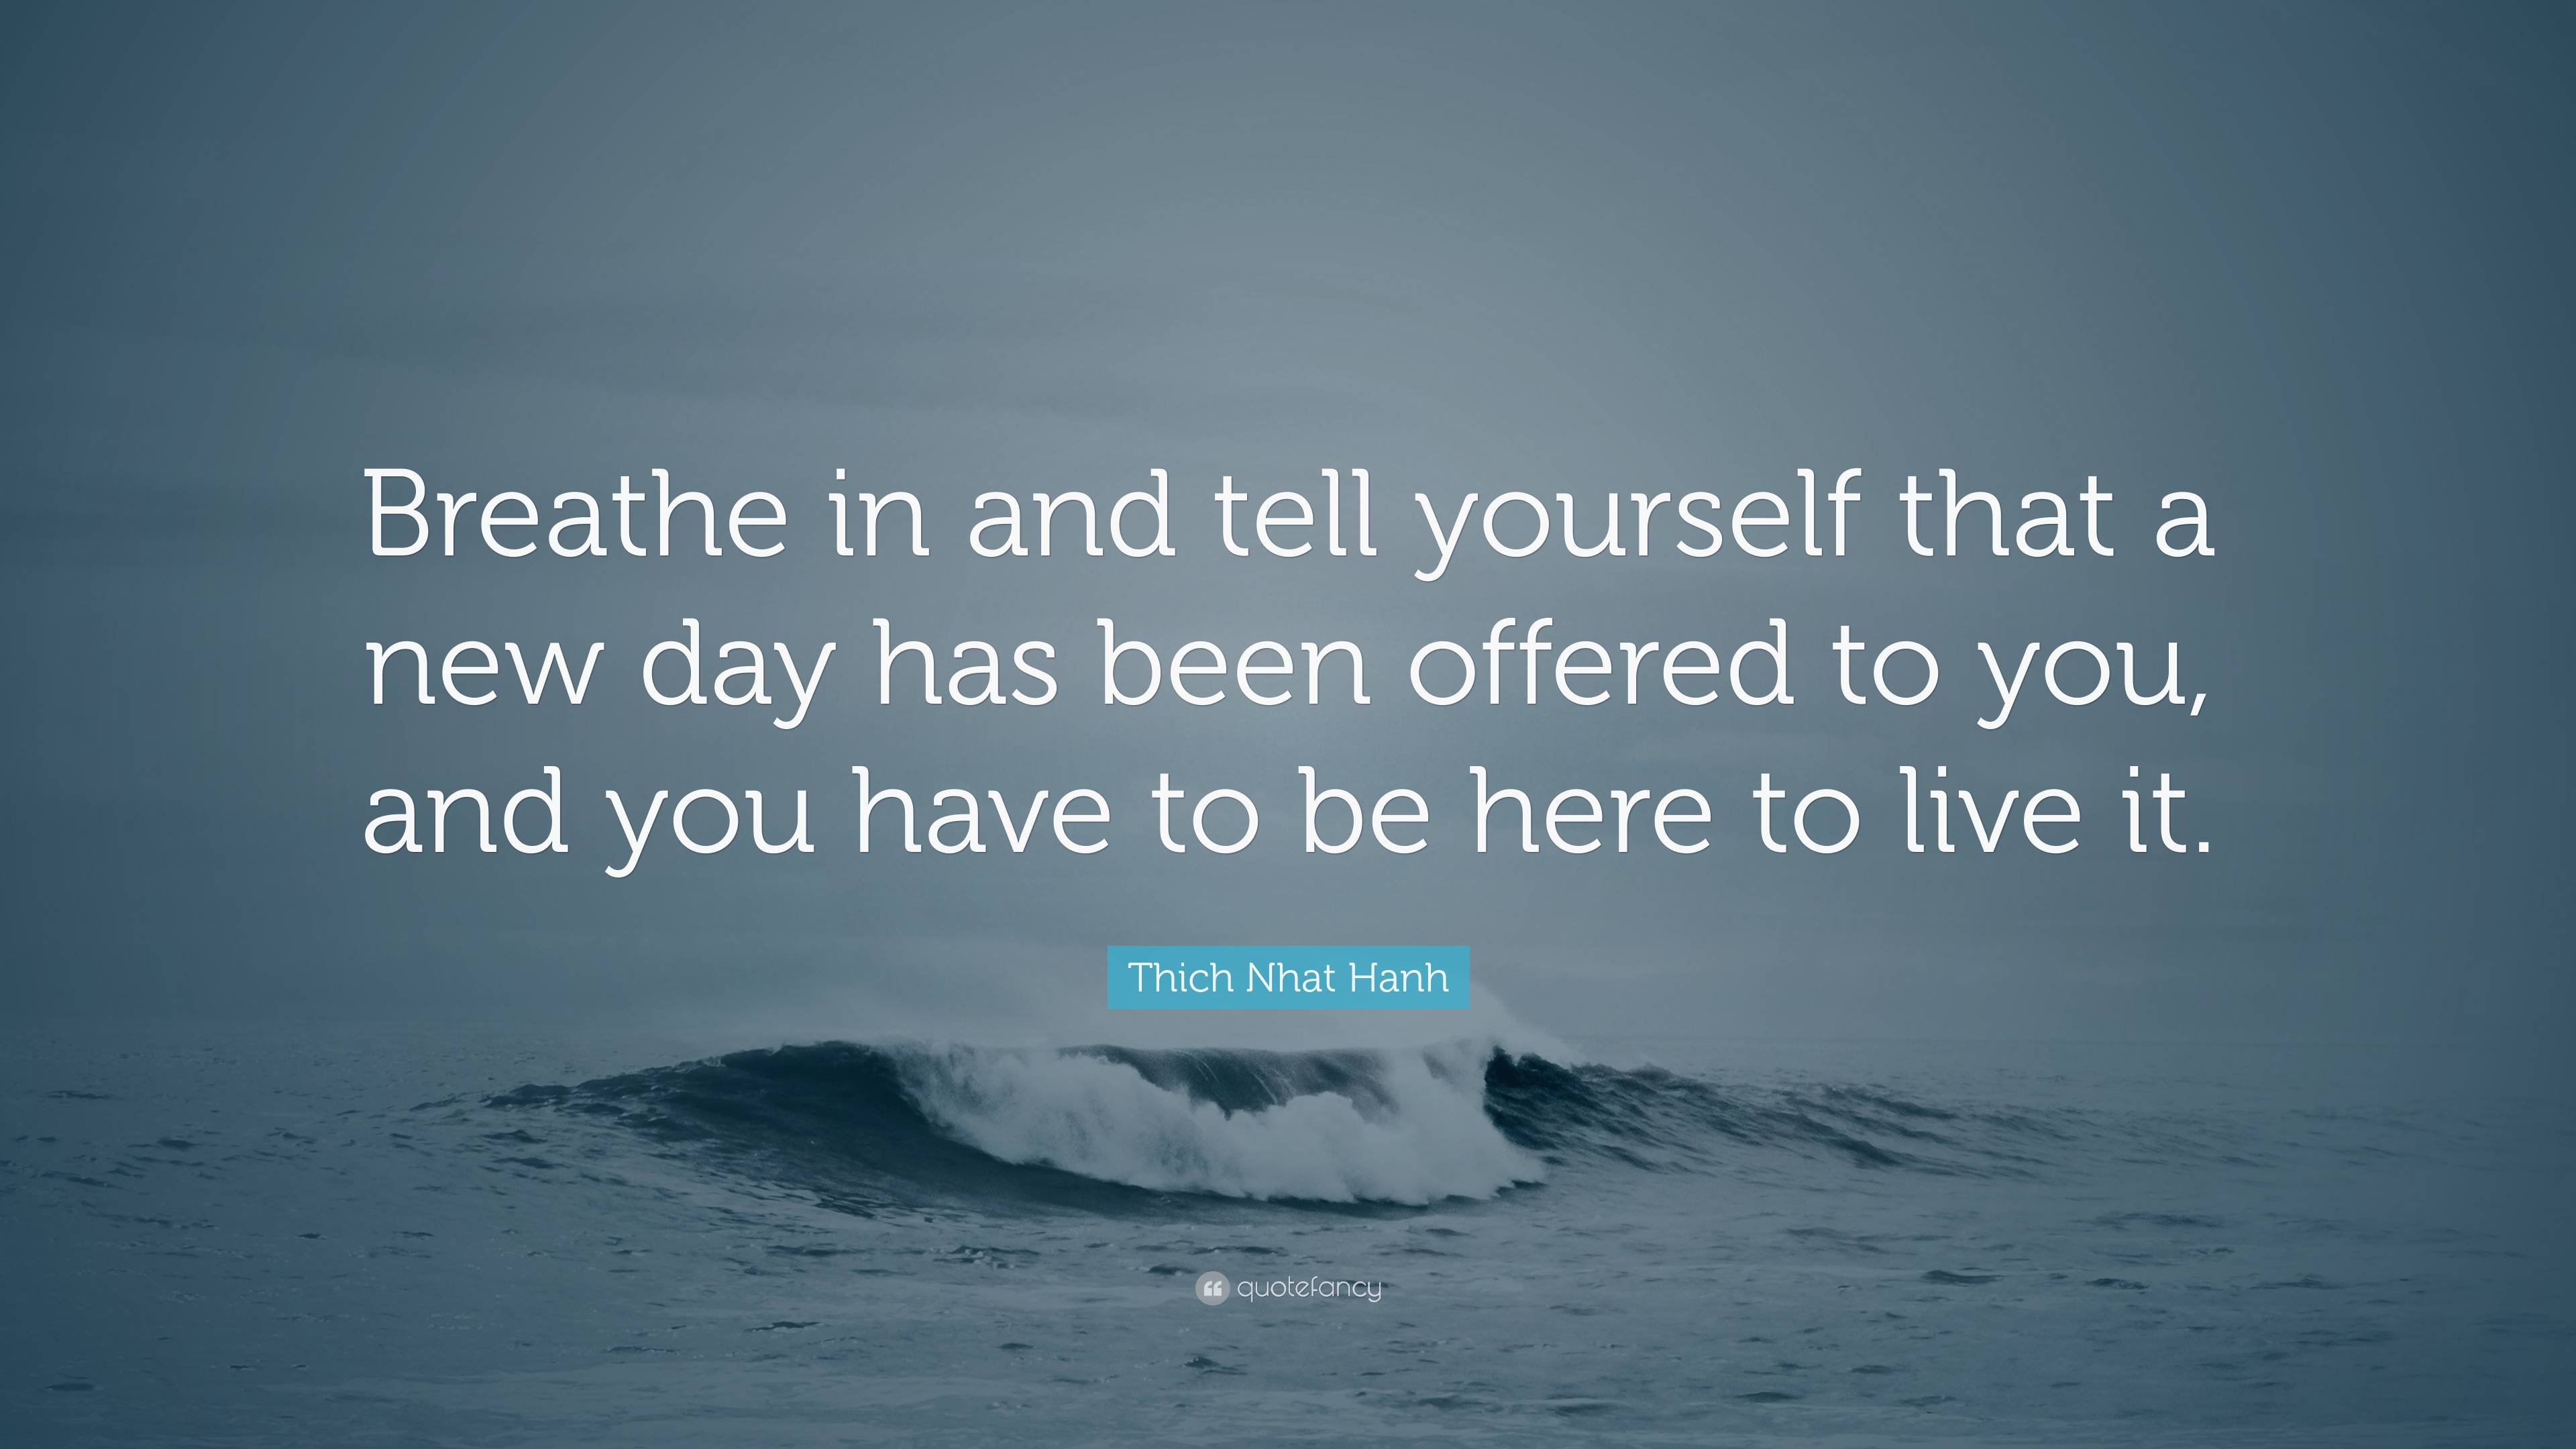 https://quotefancy.com/media/wallpaper/3840x2160/7634742-Thich-Nhat-Hanh-Quote-Breathe-in-and-tell-yourself-that-a-new-day.jpg